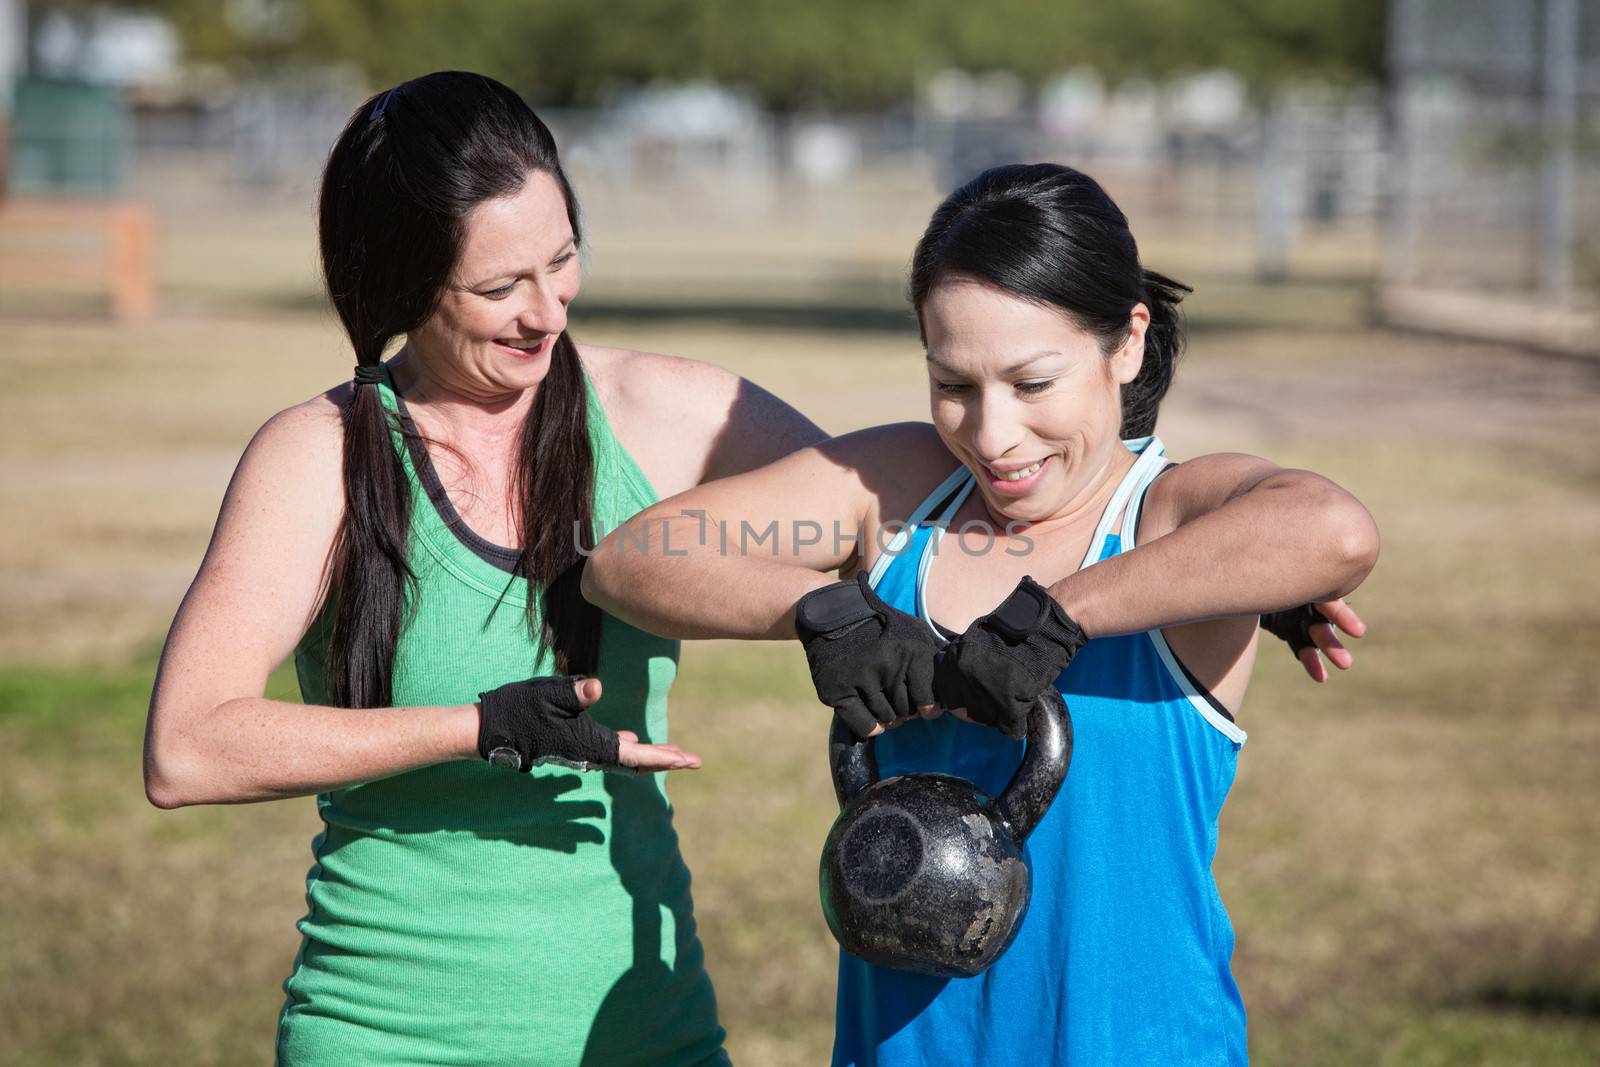 Woman Assisting Student with Weights by Creatista